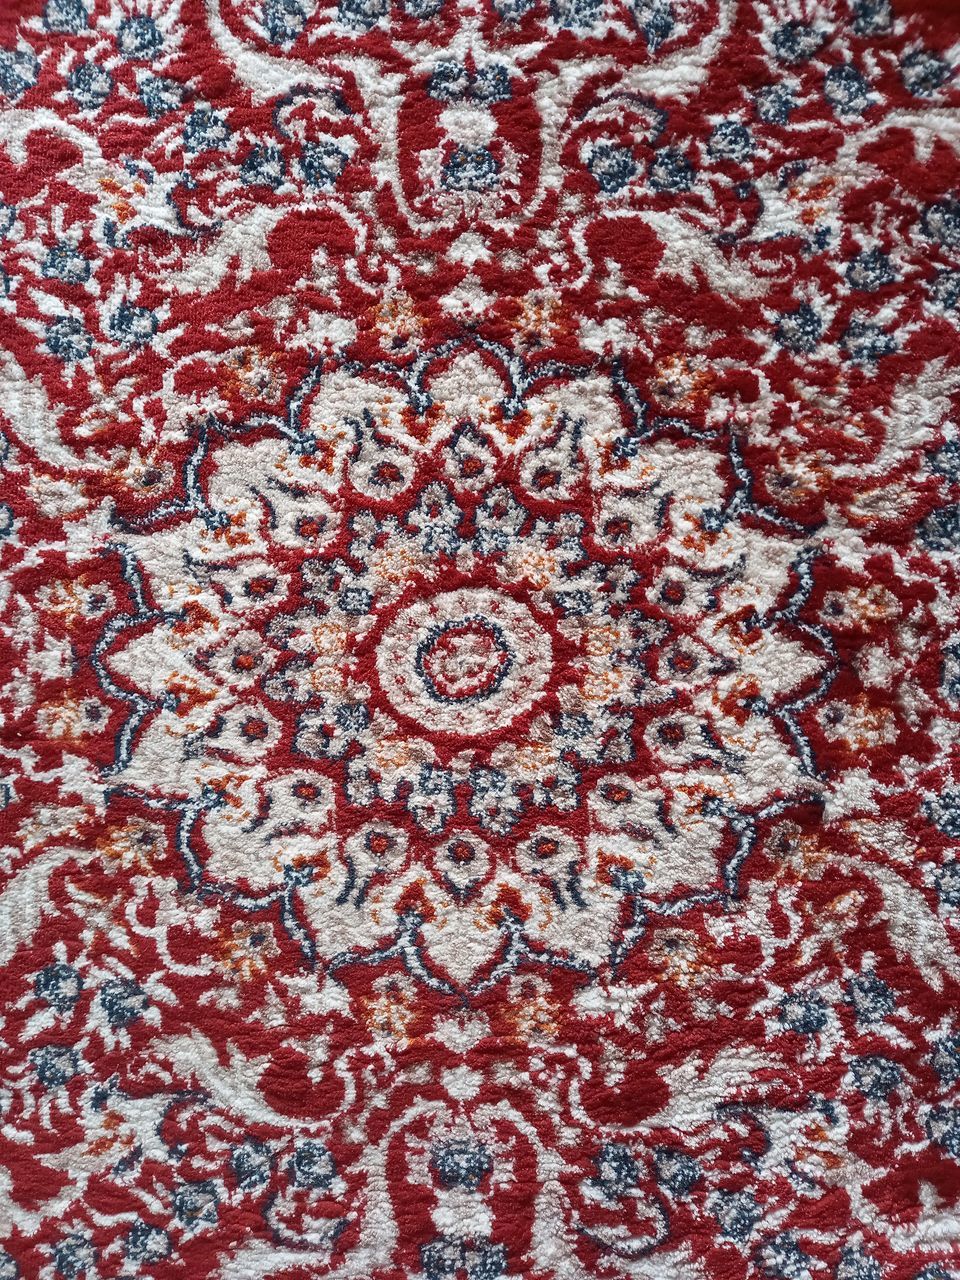 pattern, full frame, backgrounds, flooring, no people, red, art, close-up, floral pattern, textile, indoors, textured, creativity, carpet, craft